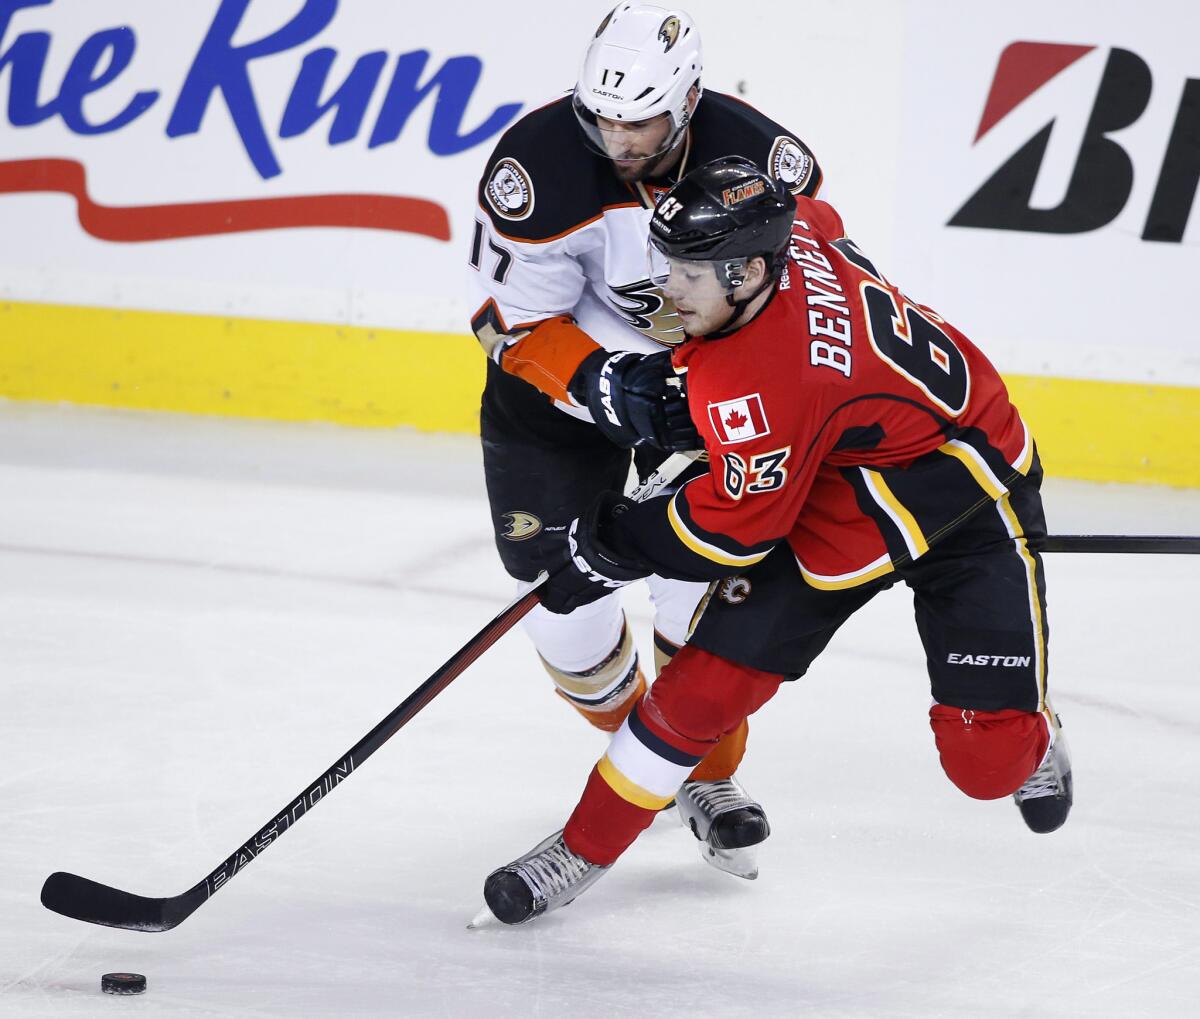 Ducks center Ryan Kesler and Flames center Sam Bennett battle for the puck during the first period of Game 3.